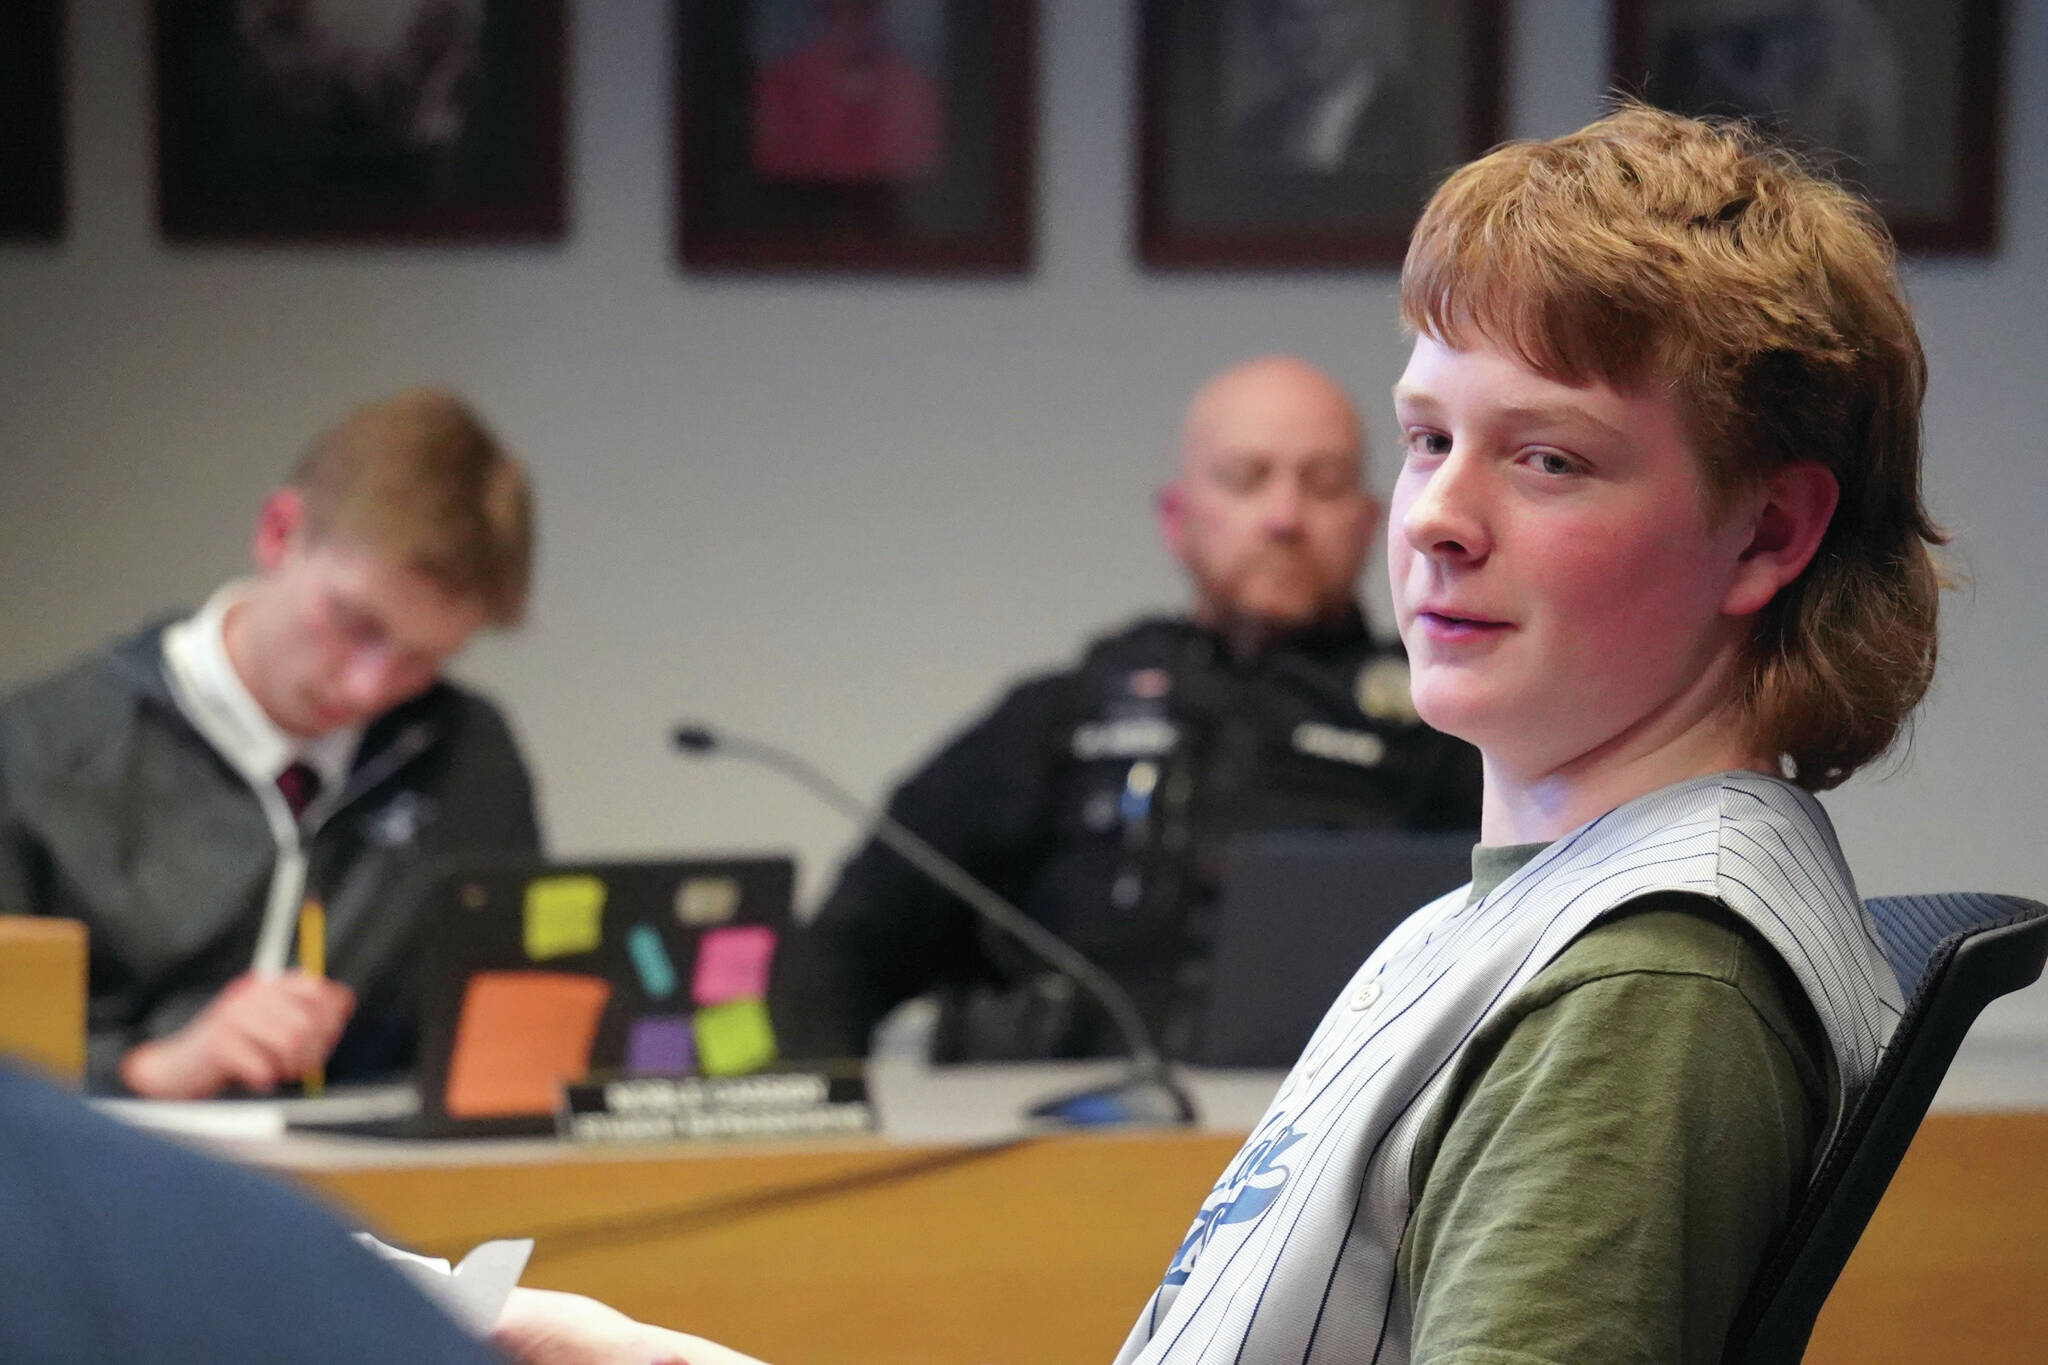 Jake Dye/Peninsula Clarion
Corey Cannon, who plays baseball as part of Soldotna Little League, speaks to the Soldotna City Council during their meeting in Soldotna on Wednesday.